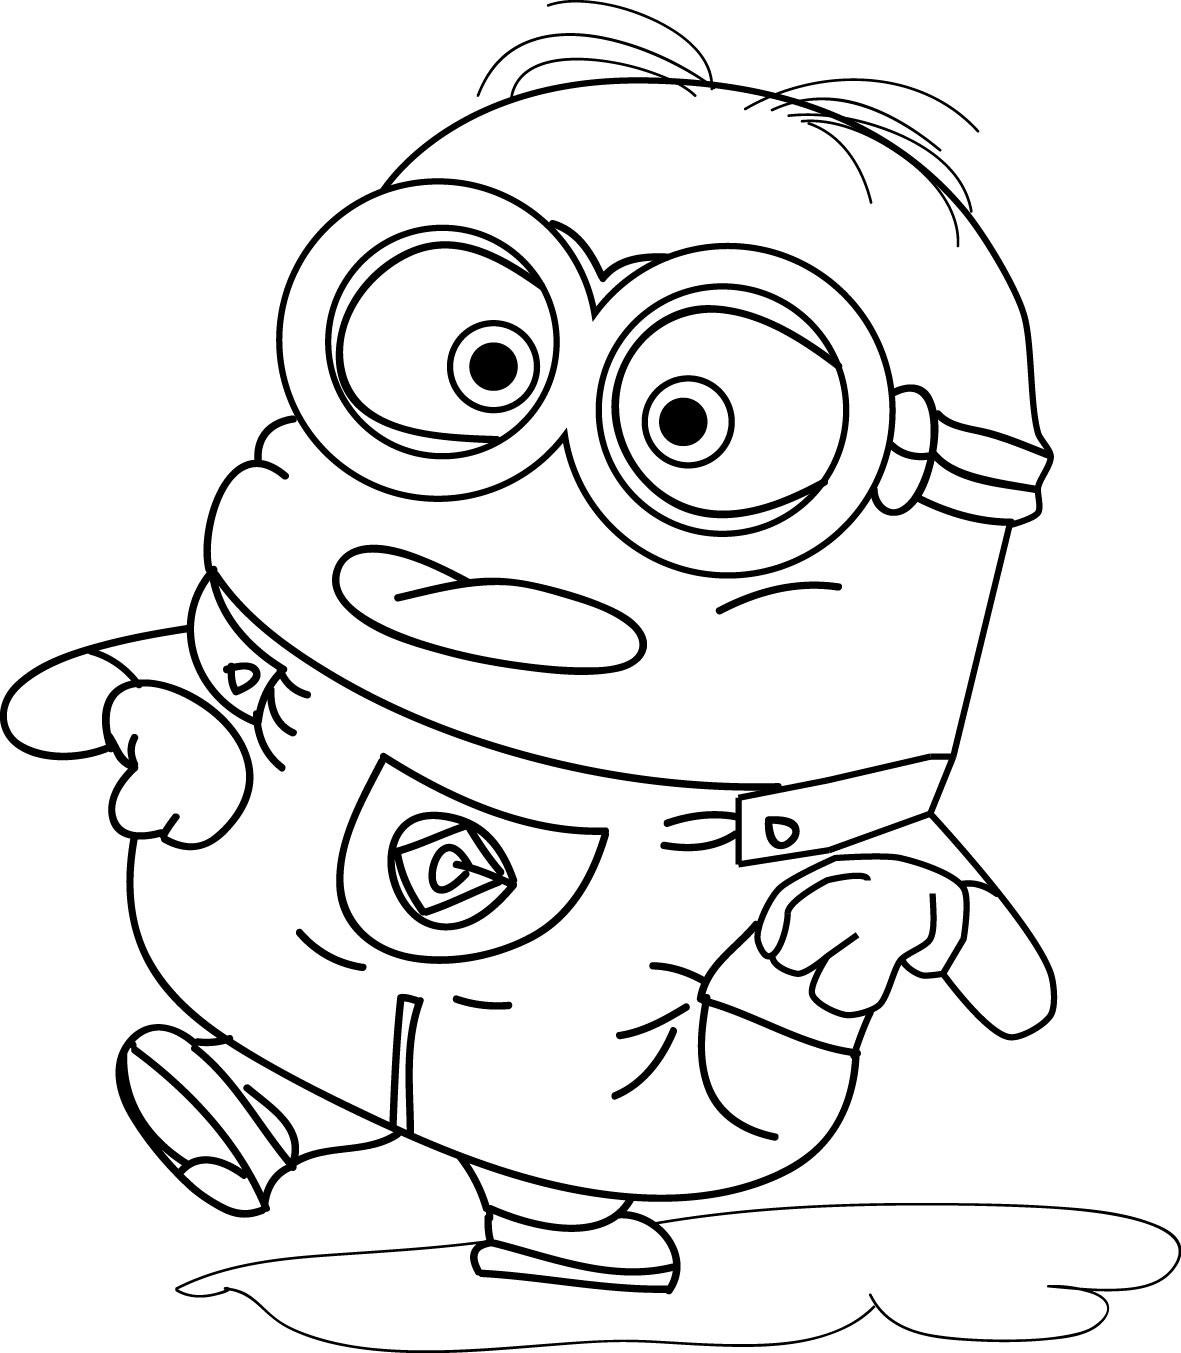 Minion-Coloring-Pages2